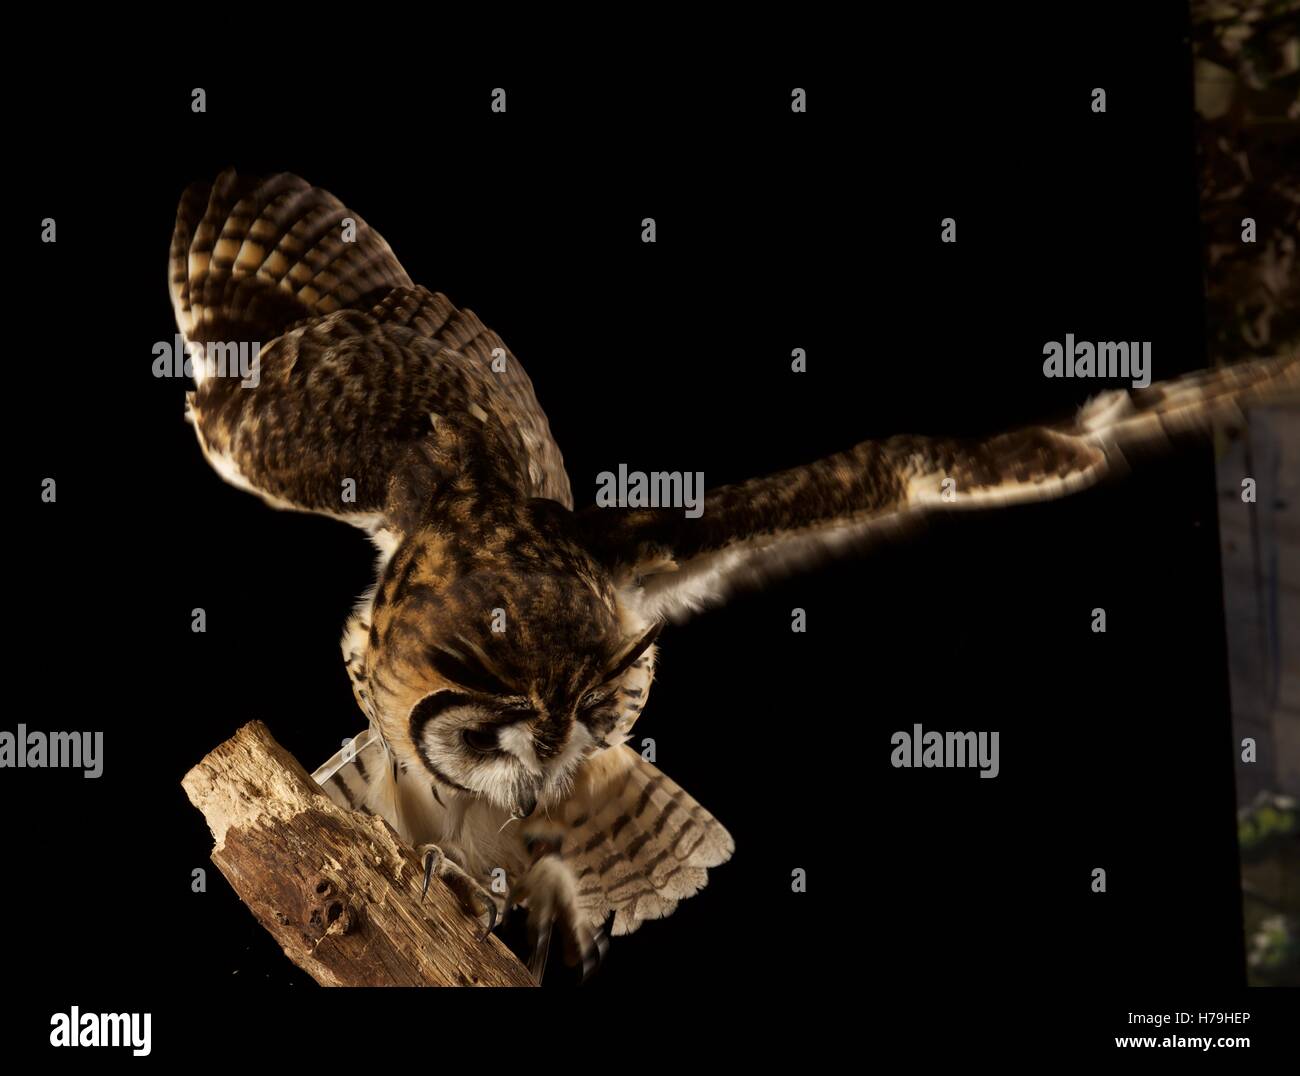 Striped owl with open wings Stock Photo